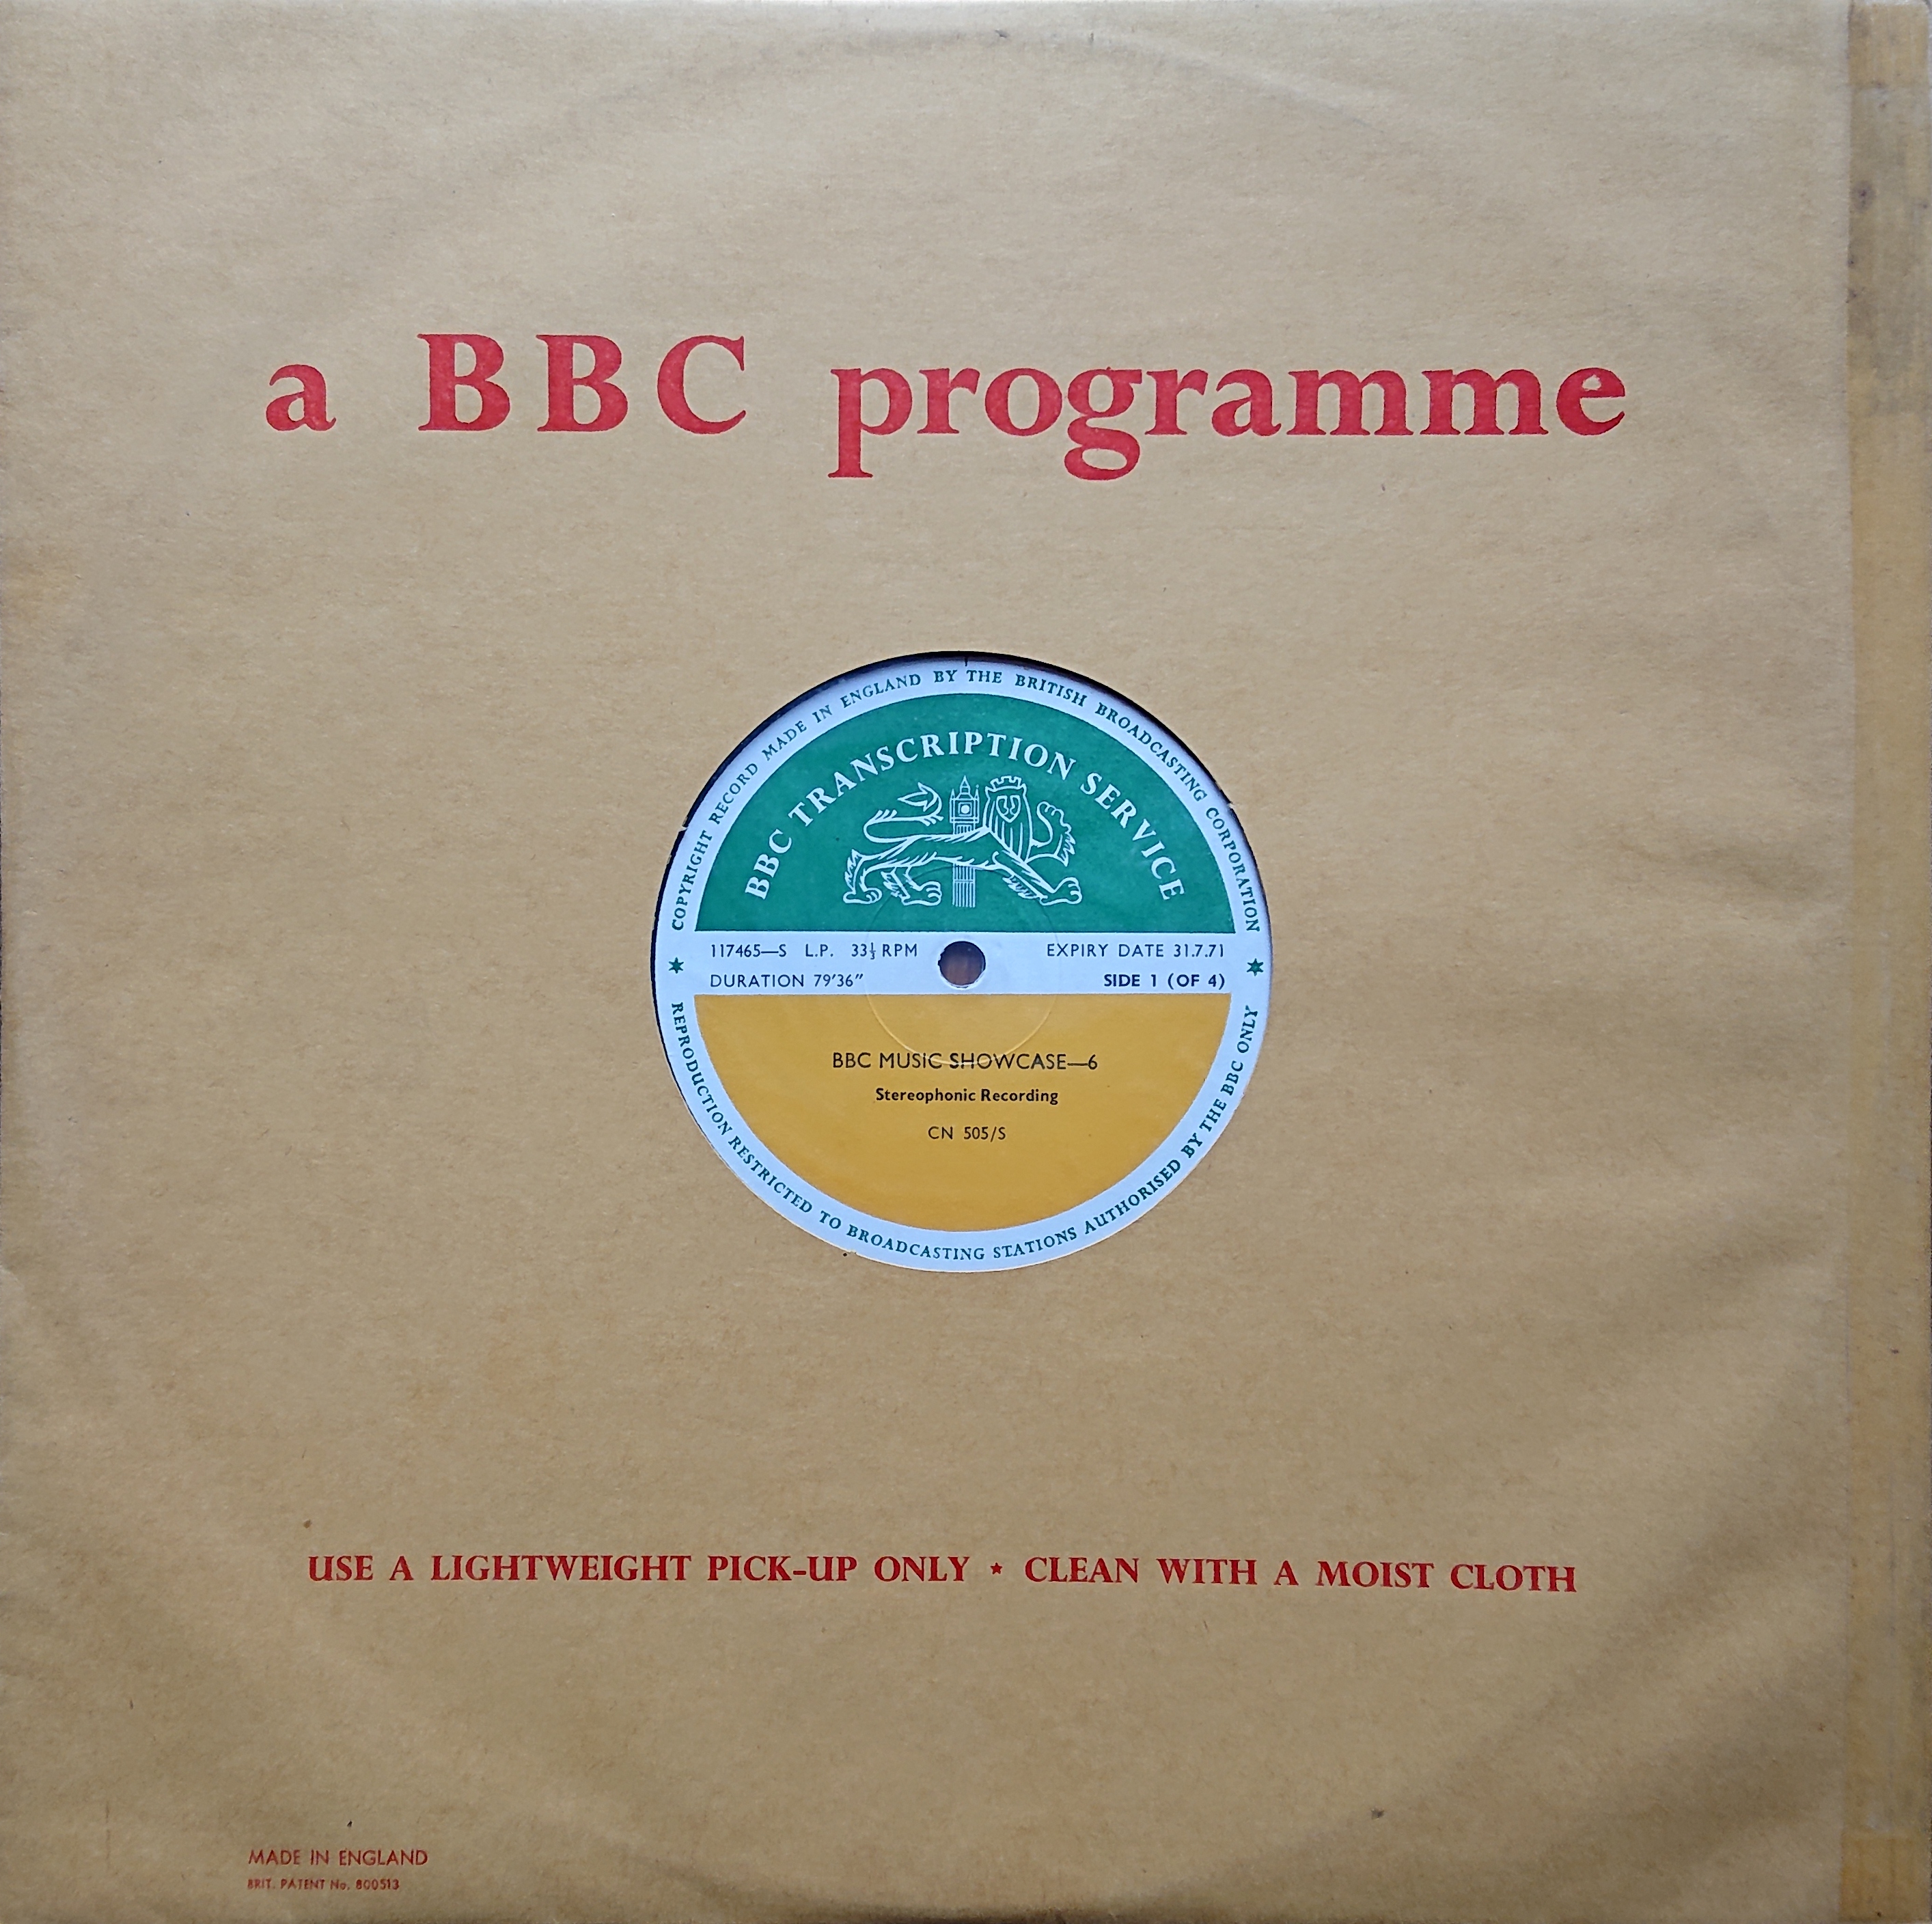 Picture of CN 505 S 11 BBC music showcase - 6 (Sides 1 & 3) by artist Various from the BBC records and Tapes library